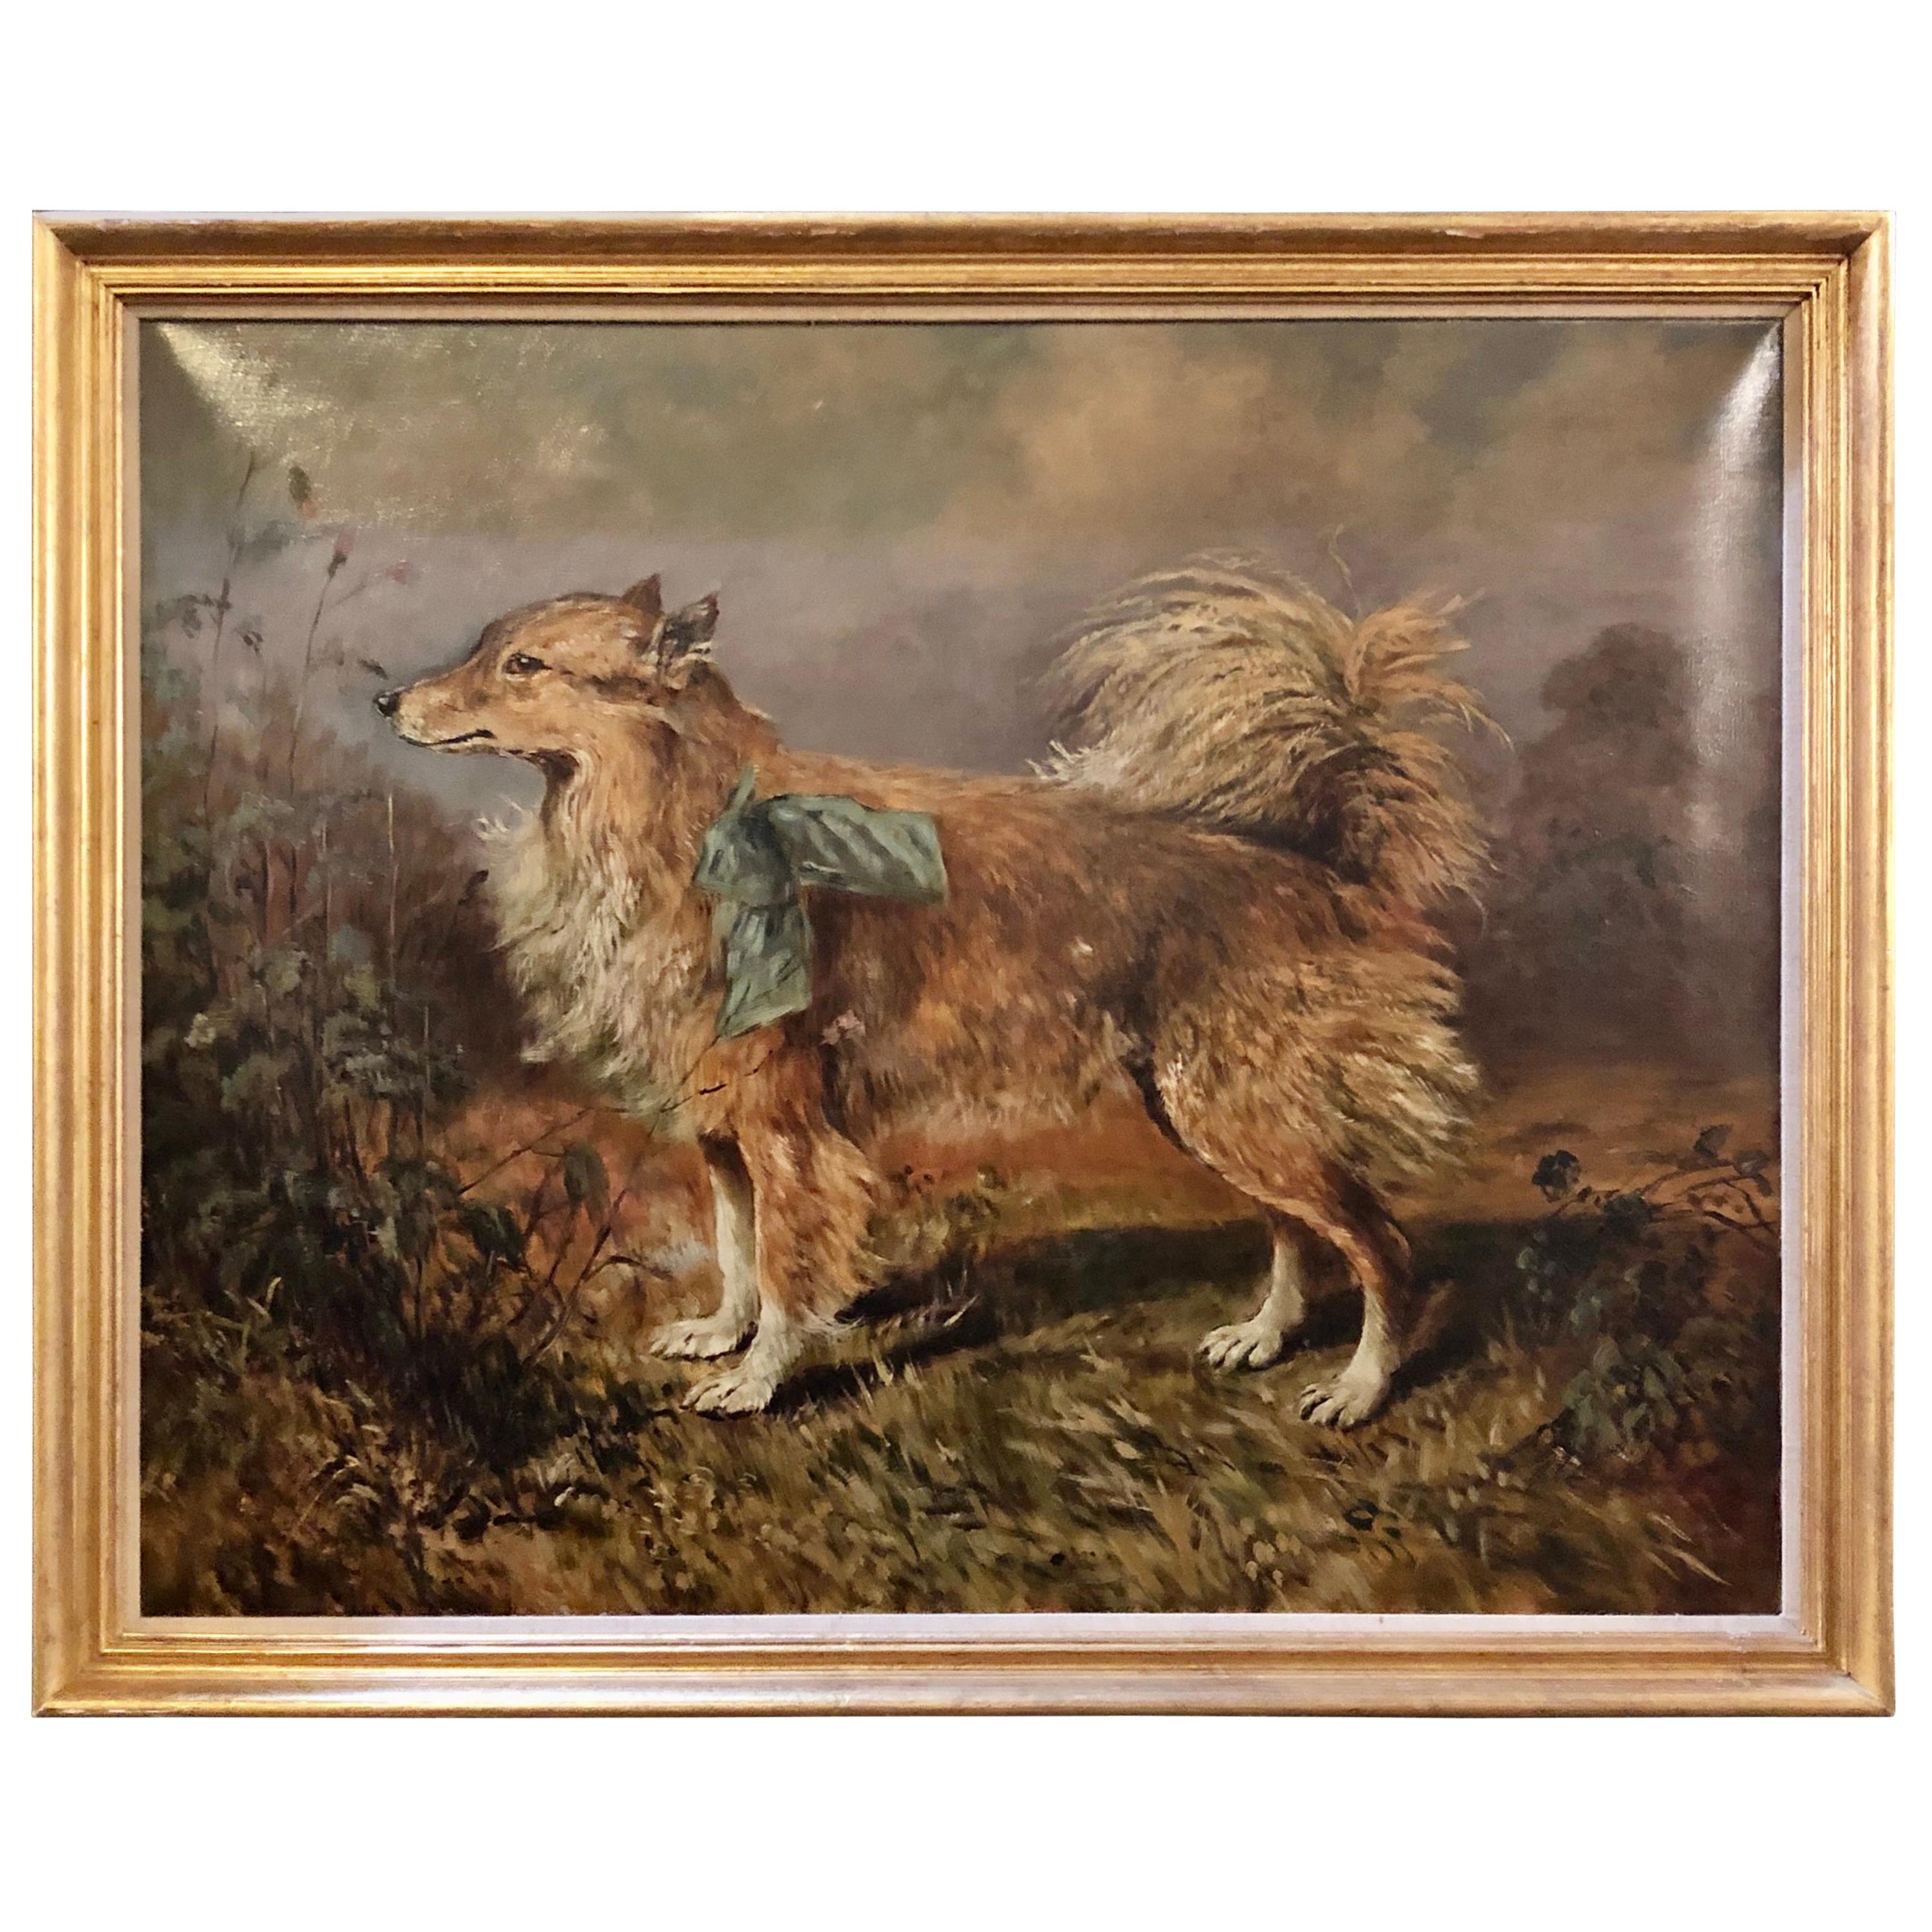 19th-20th Century Oil on Canvas of a Dog in a Landscape by Raymond Dearn